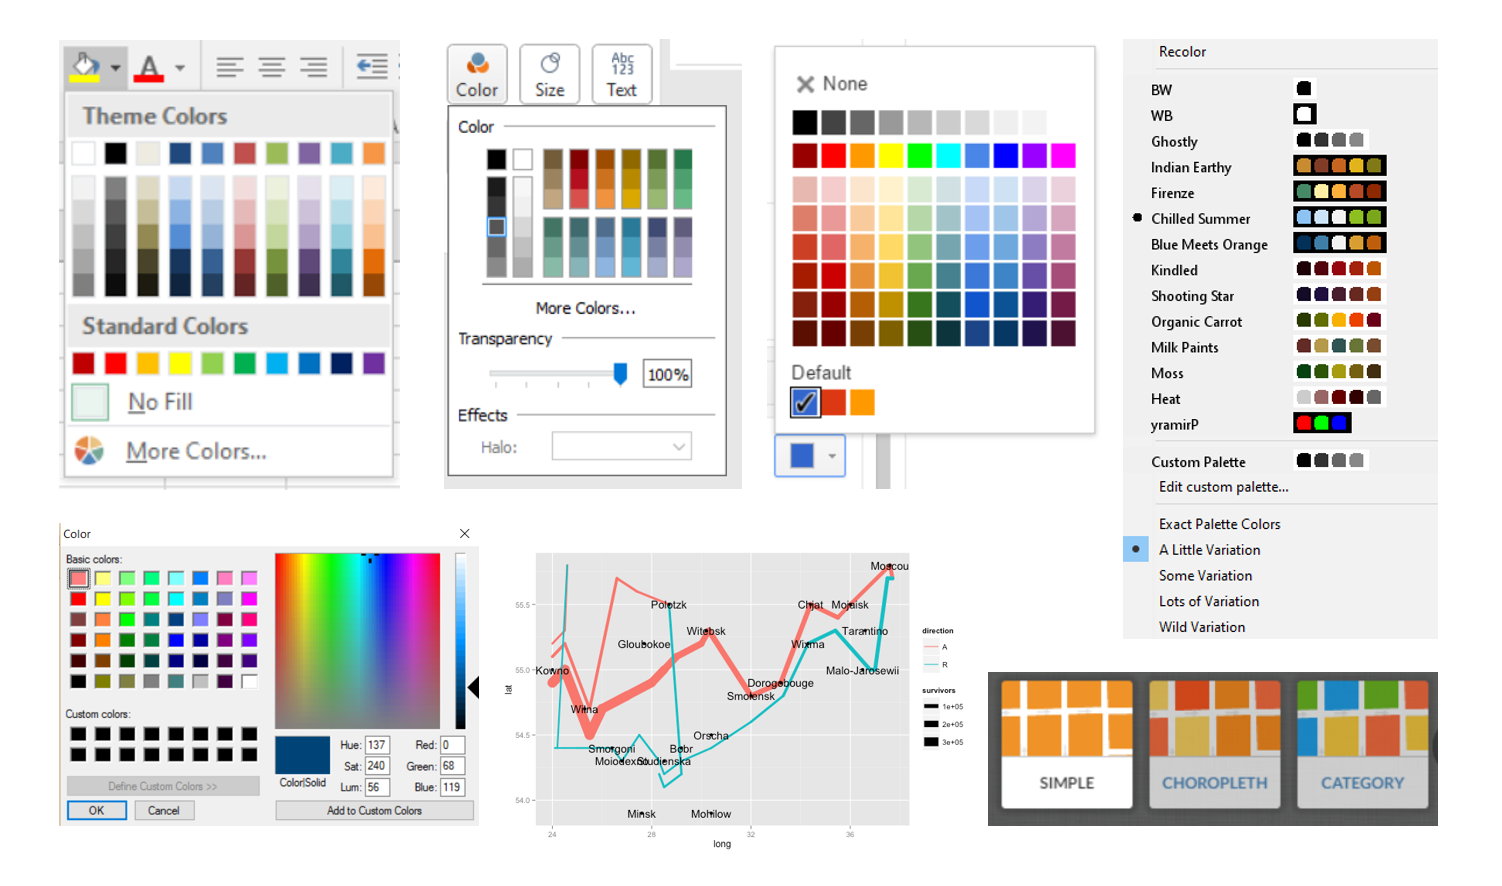 More than Looking “Pretty” – Matching Graph Colors to Branding